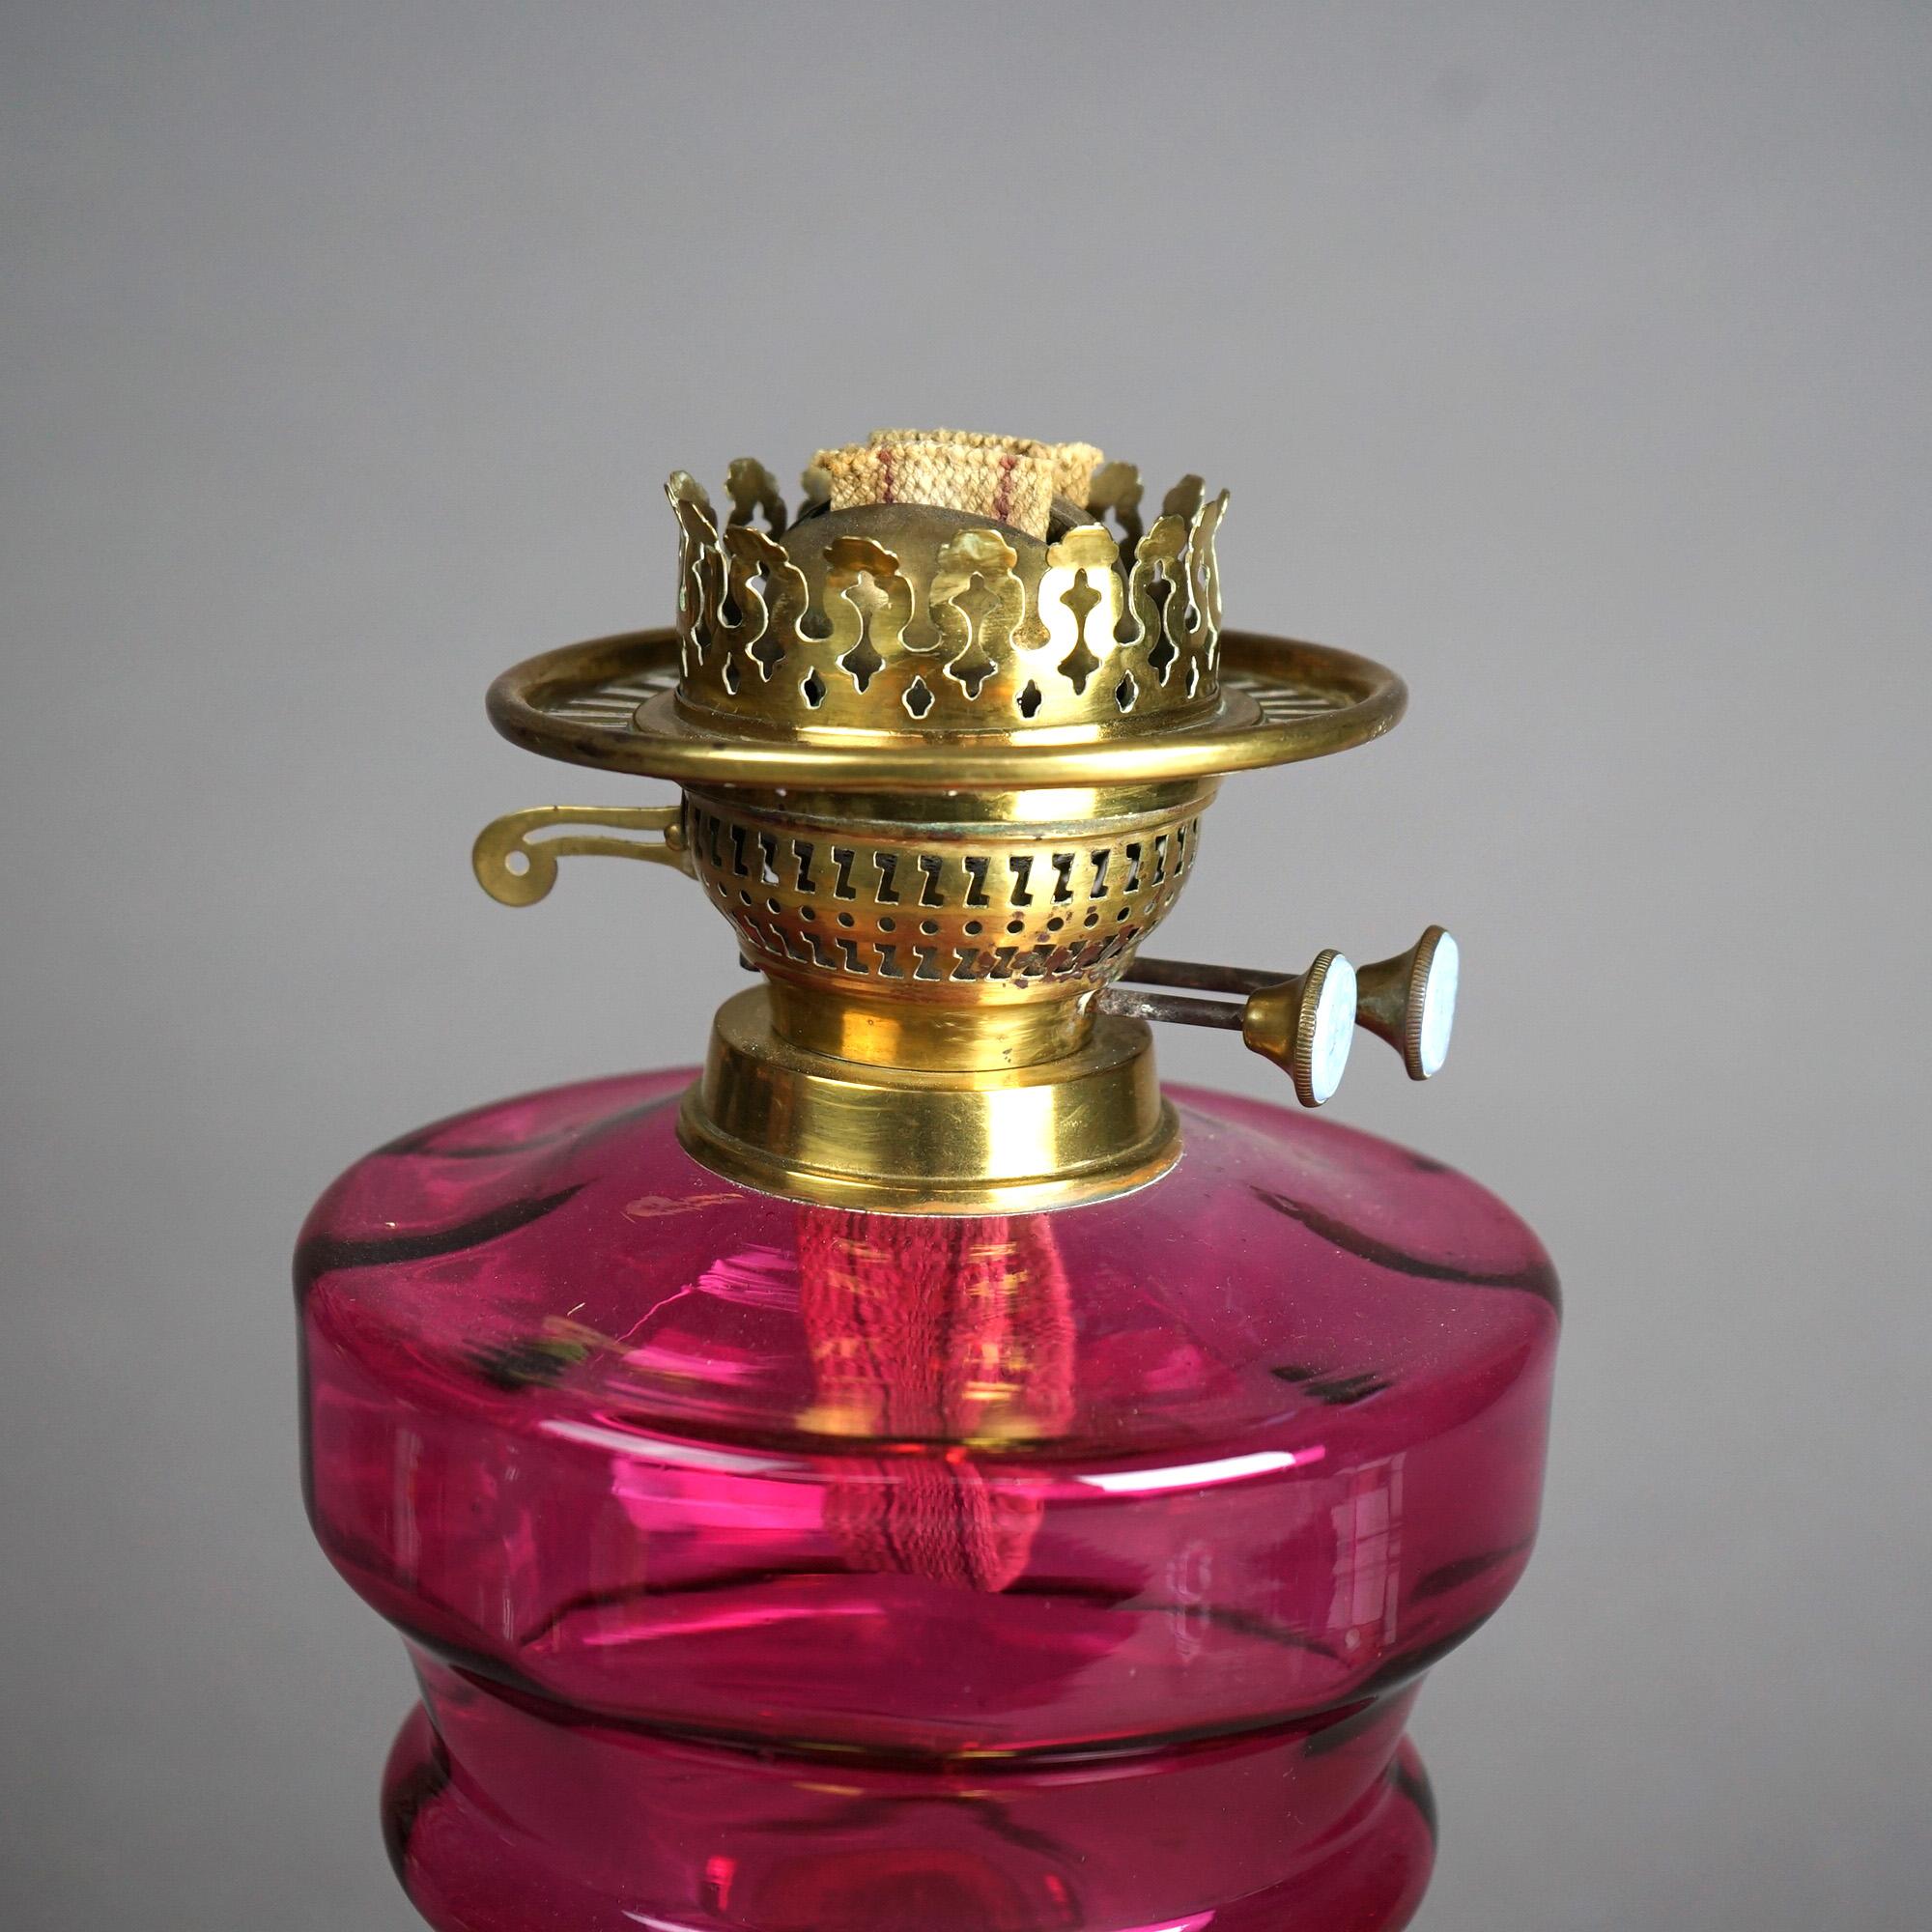 Antique Brass &Cranberry Glass “Gone With The Wind” Oil Lamp C1890 For Sale 5